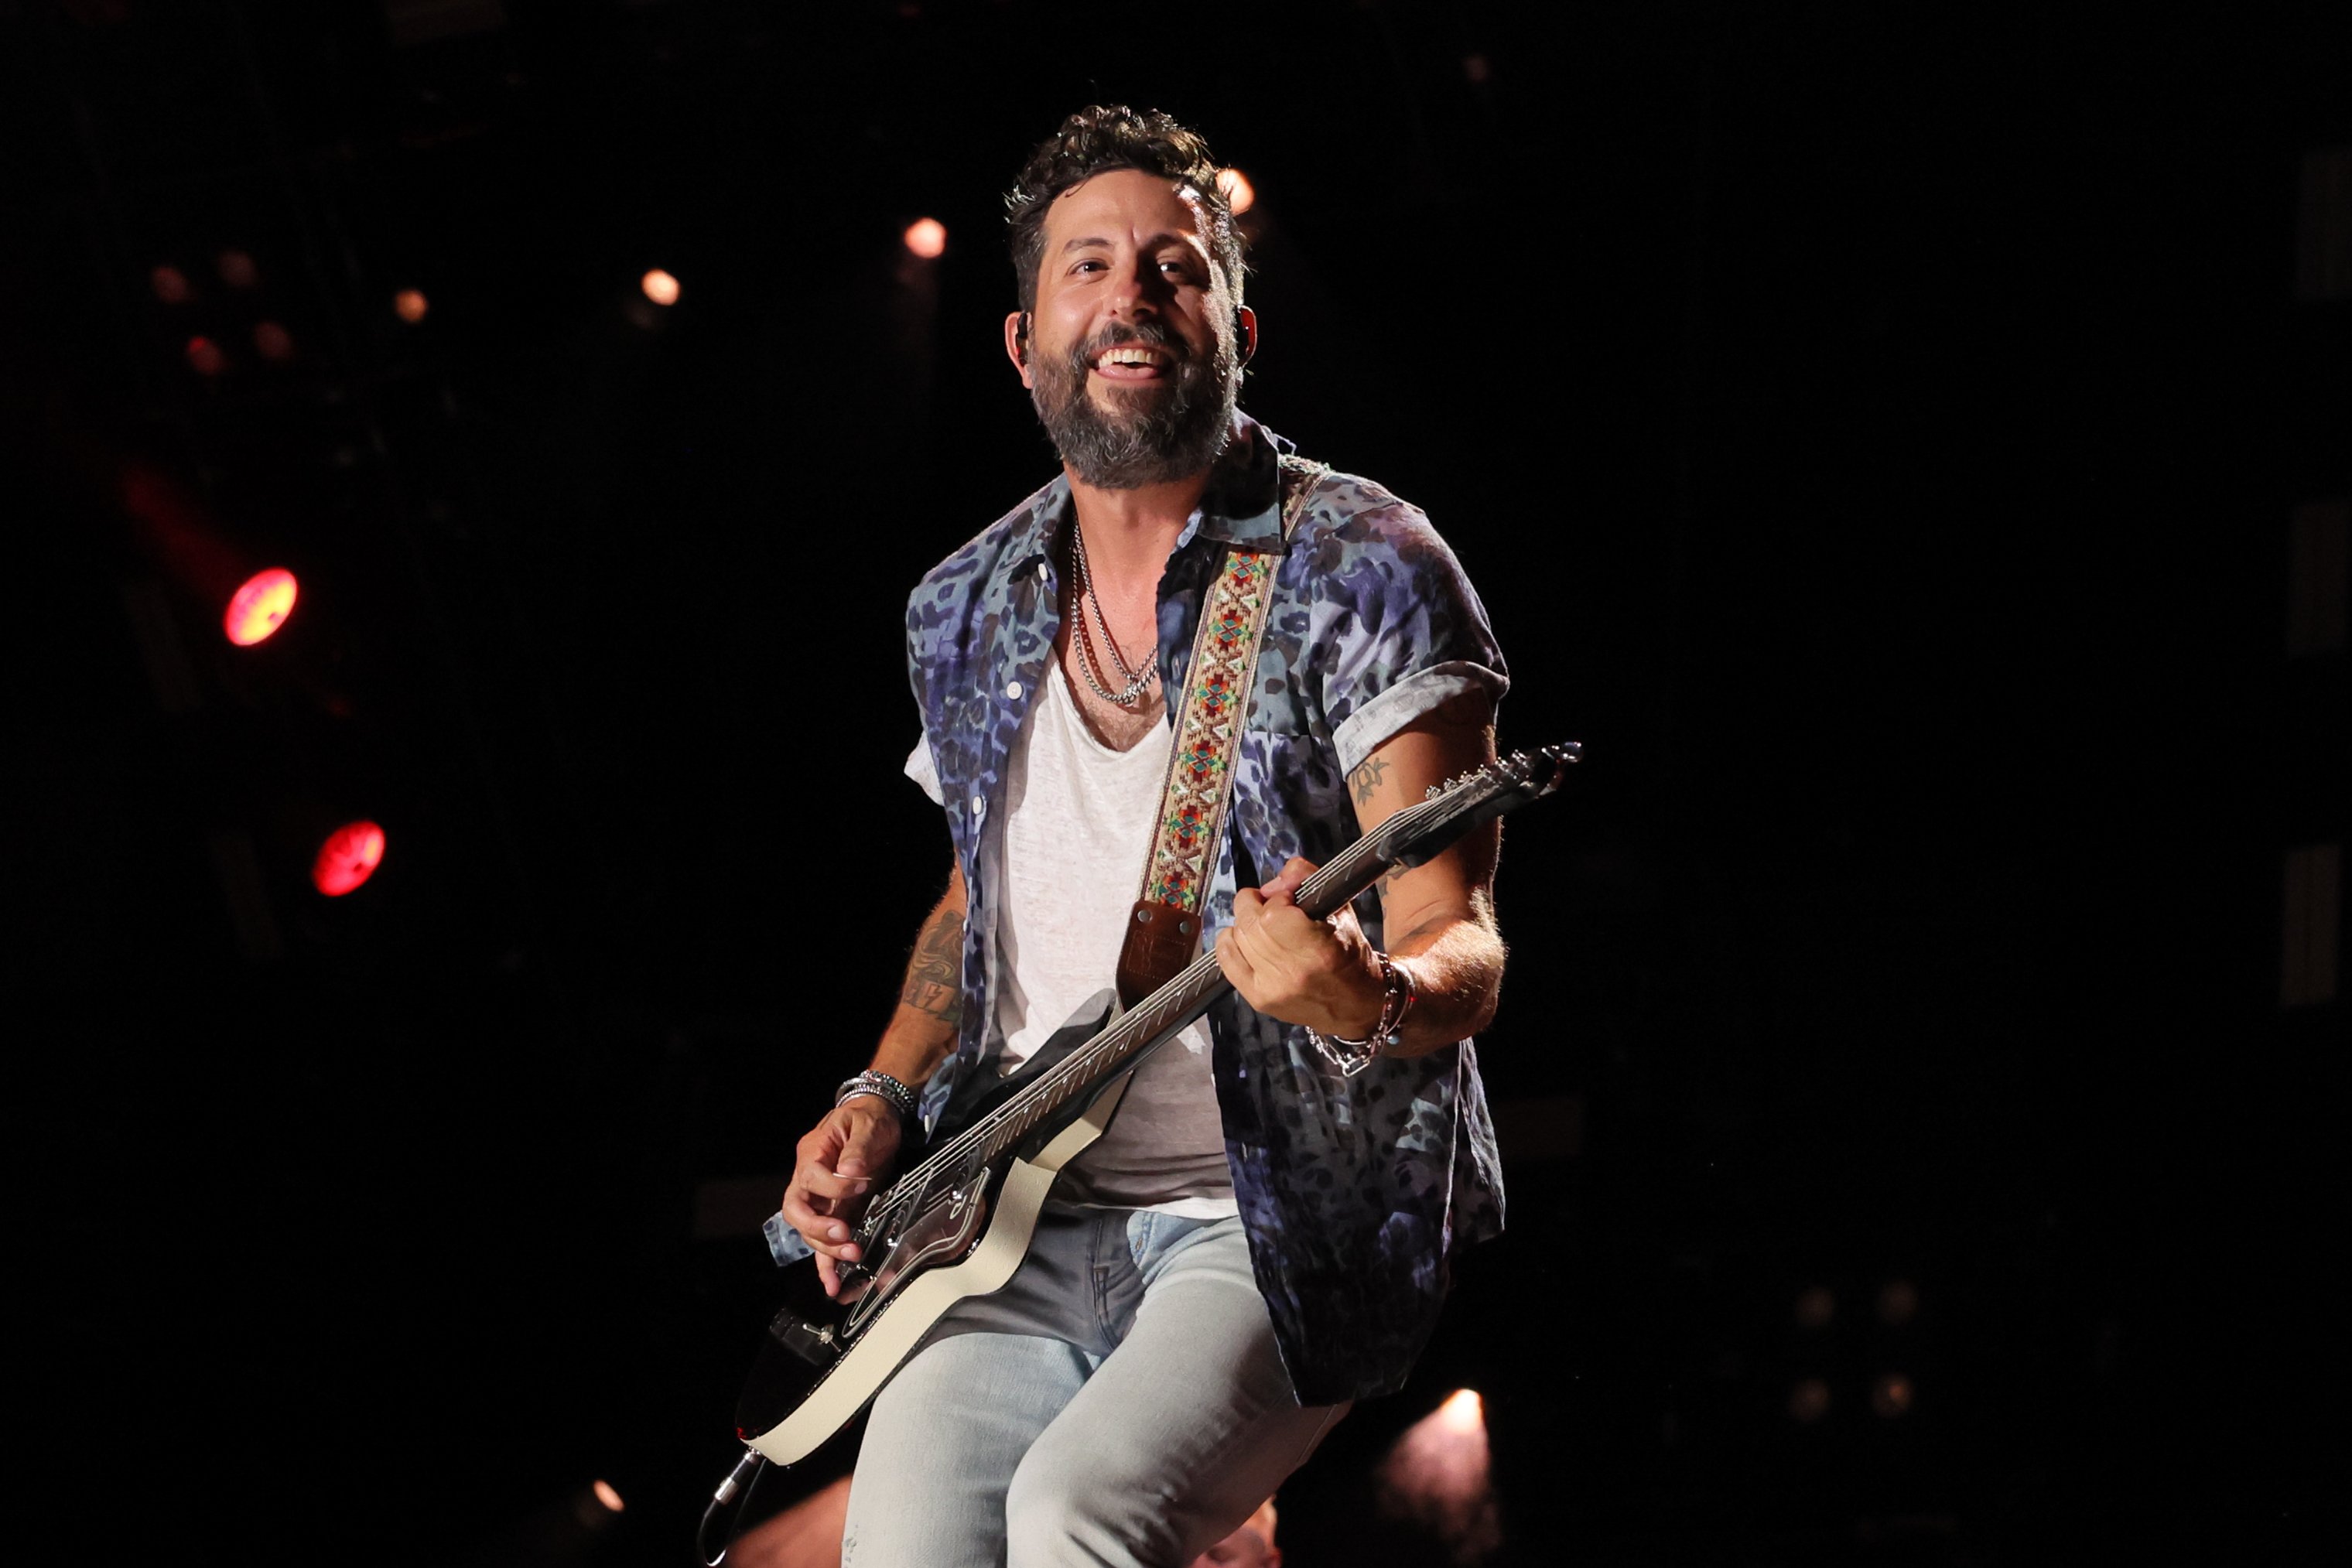 Matthew Ramsey performs with the Old Dominion band at the CMA Fest 2022 on June 12, 2022, in Nashville, Tennessee. | Source: Getty Images